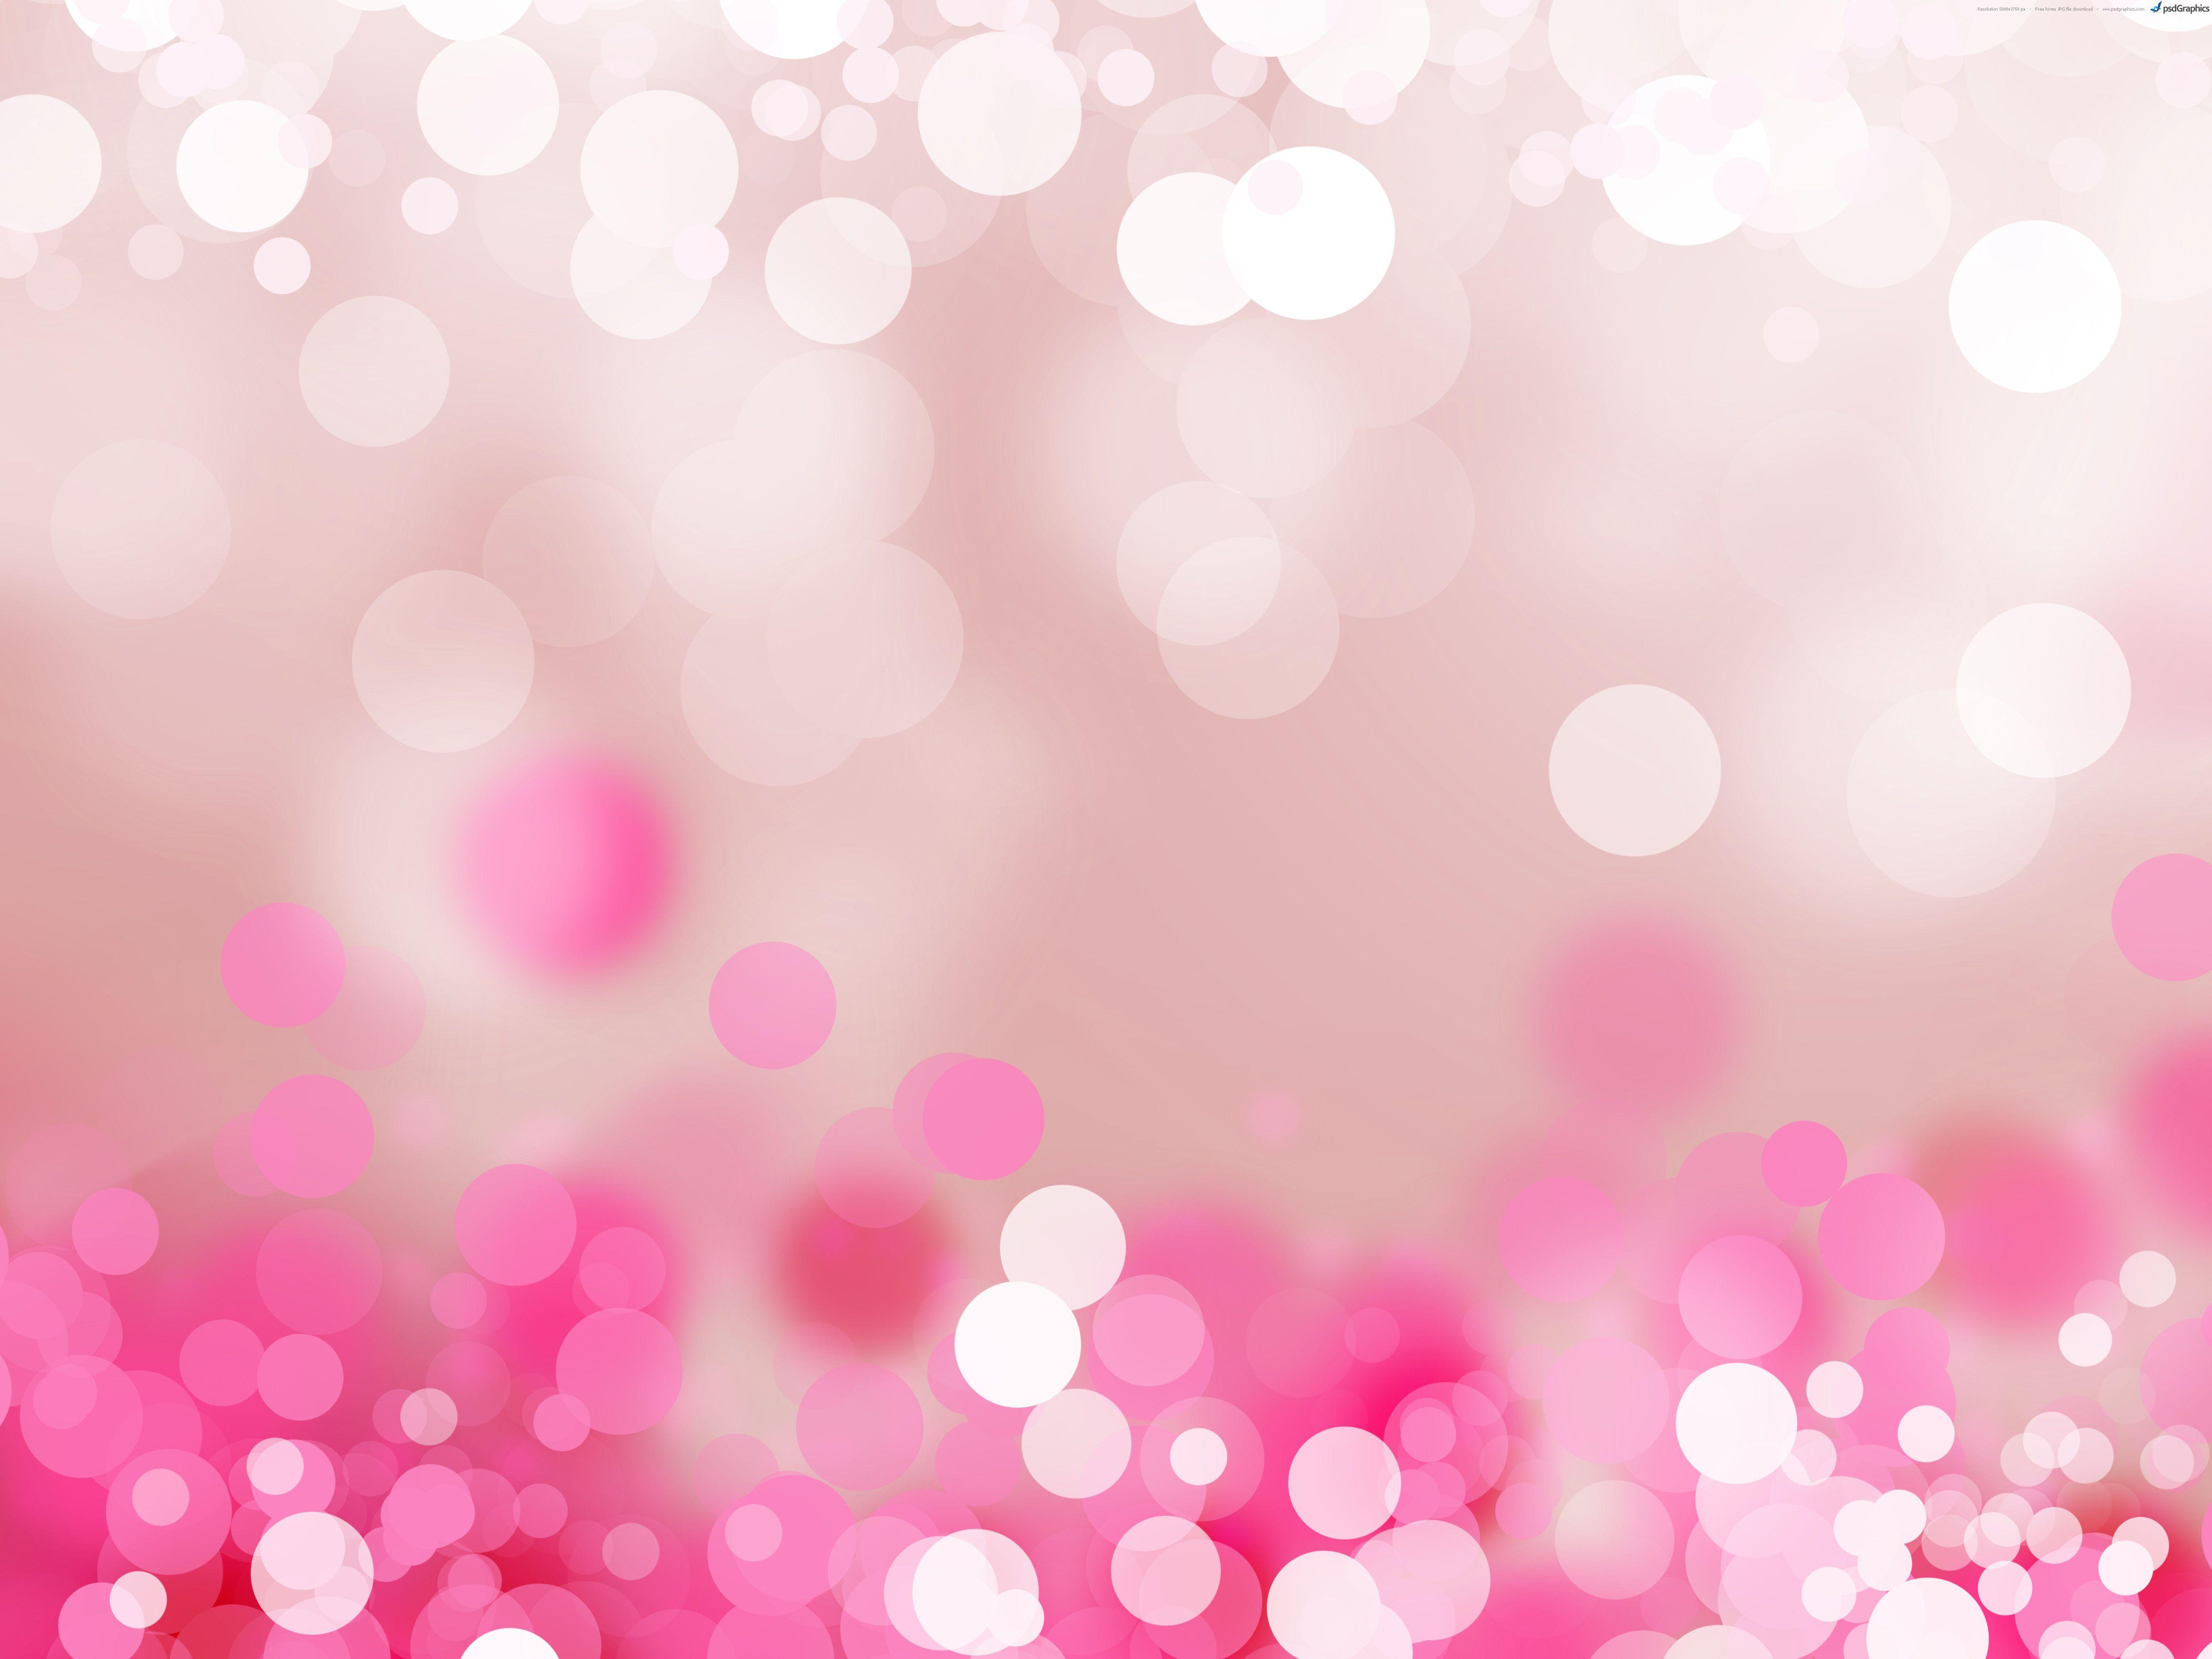 baby pink background designs 11. Background Check All